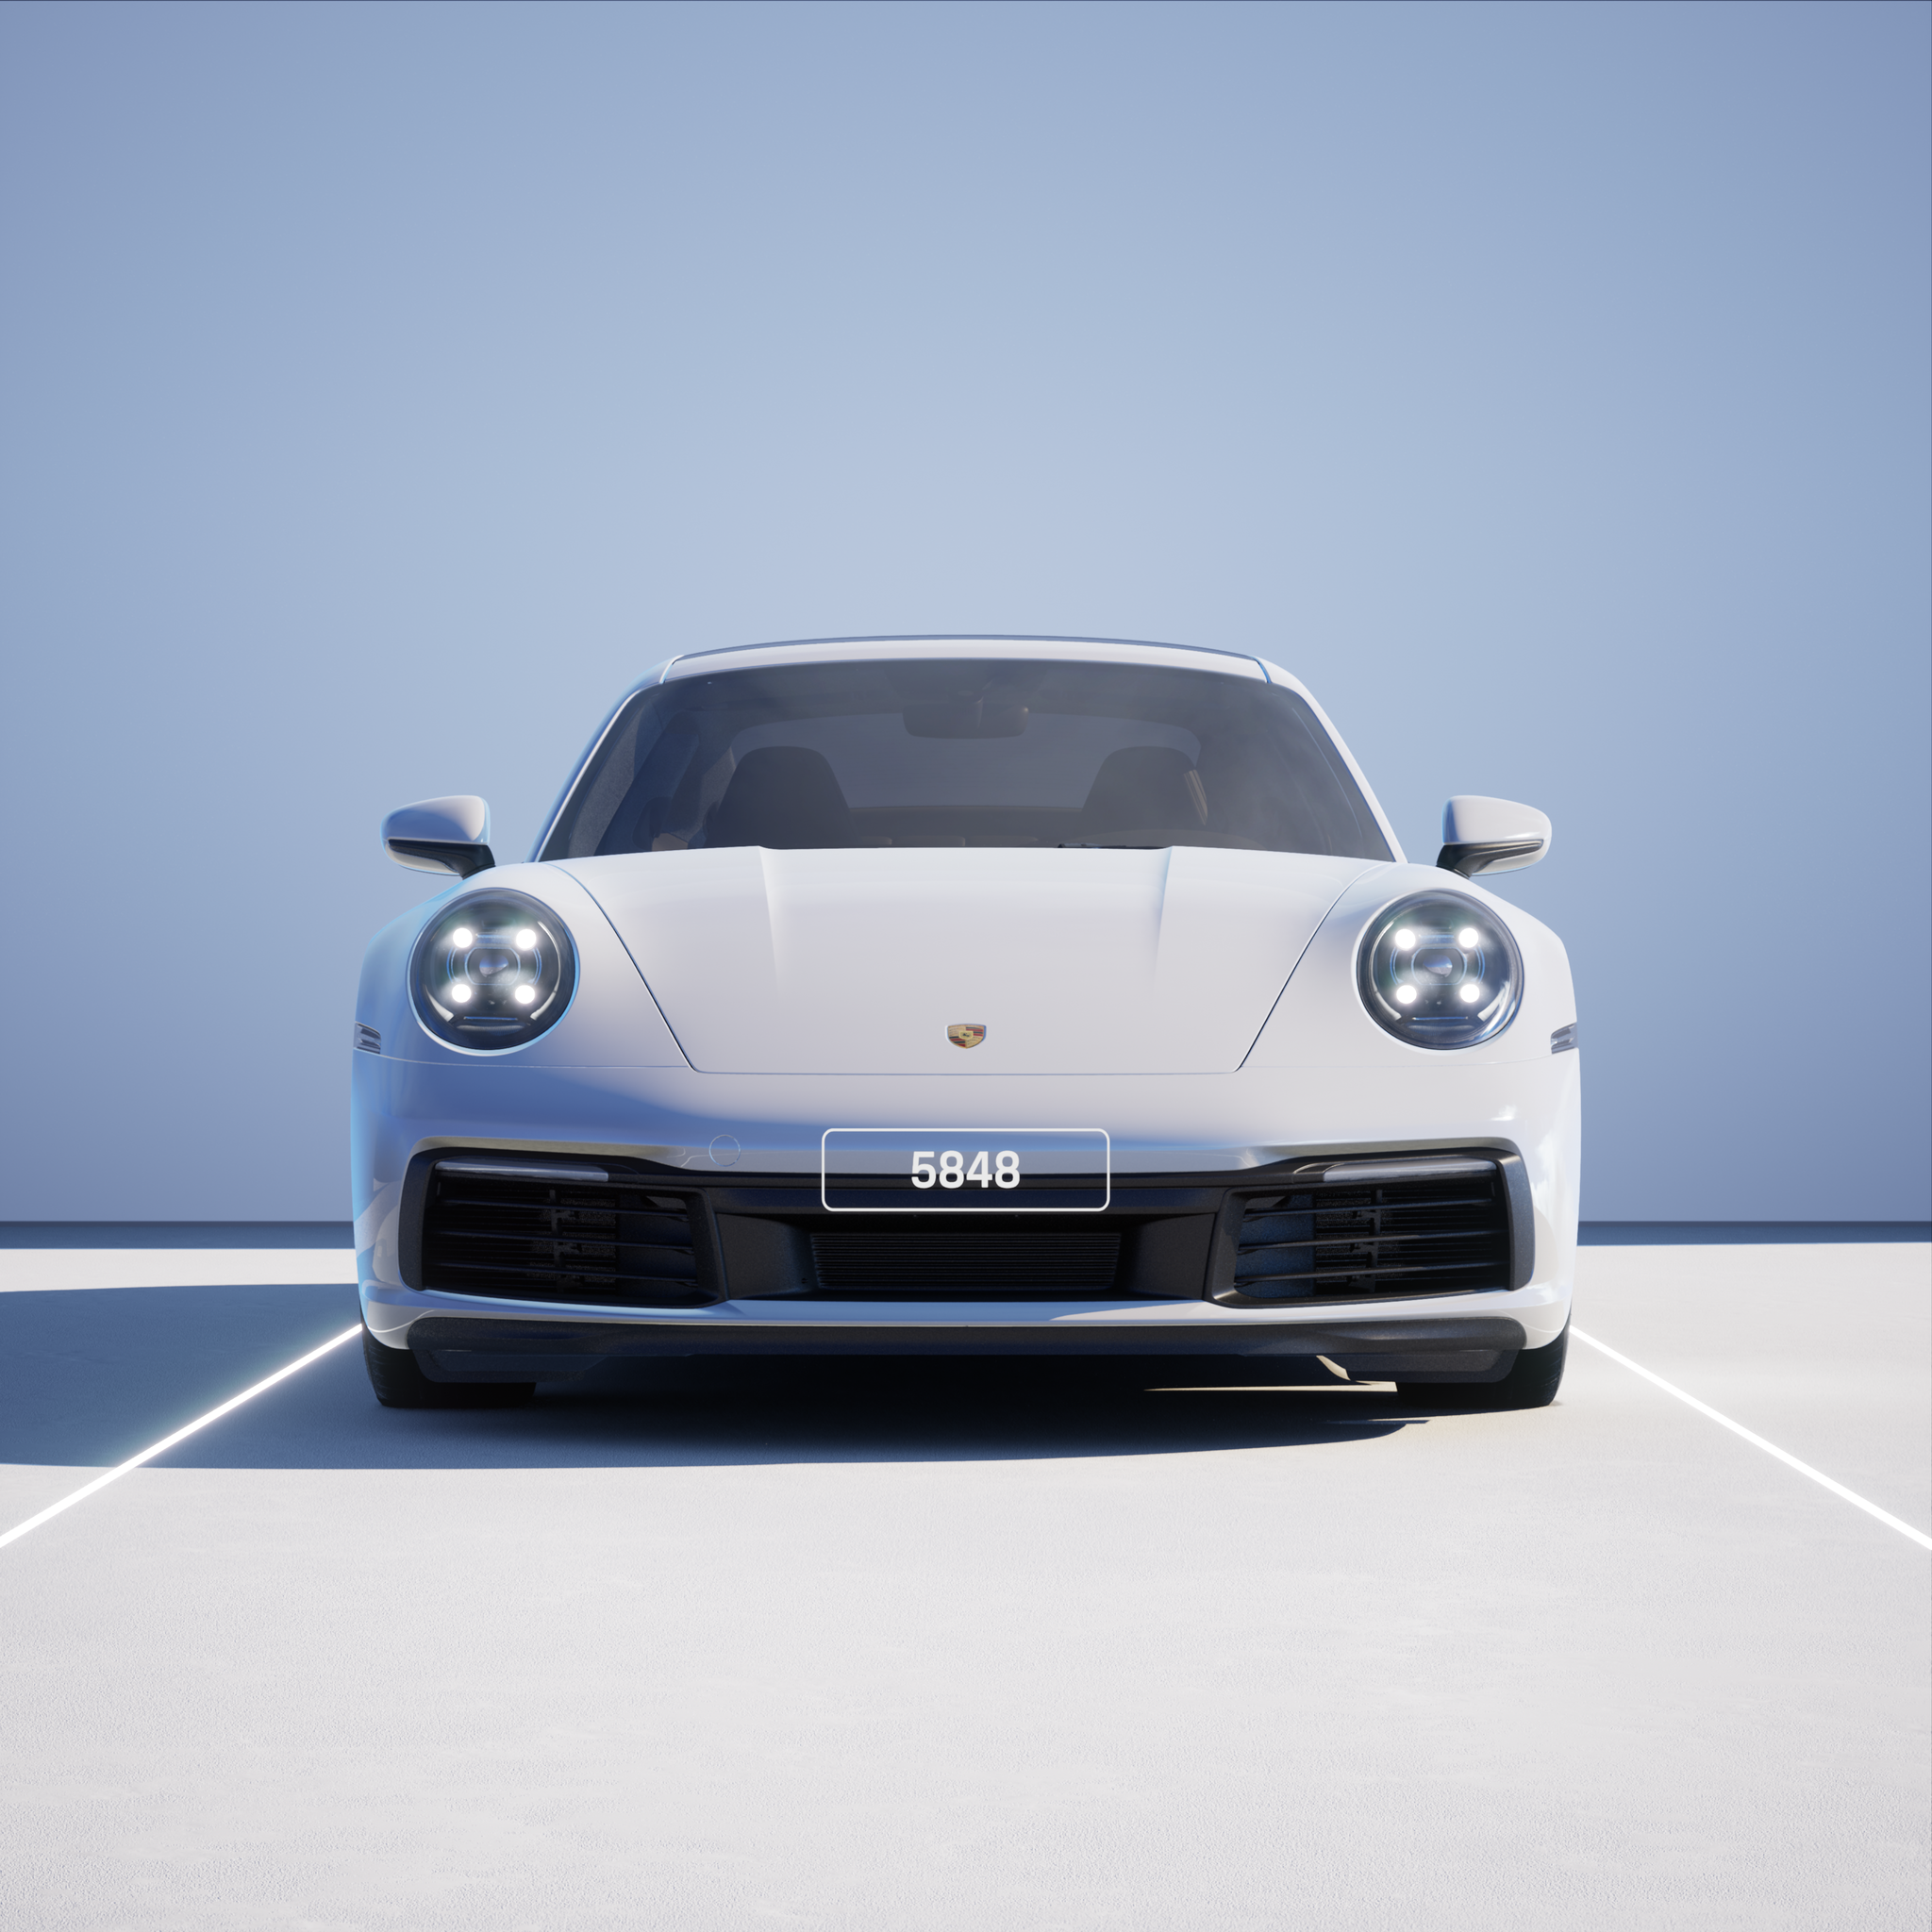 The PORSCHΞ 911 5848 image in phase